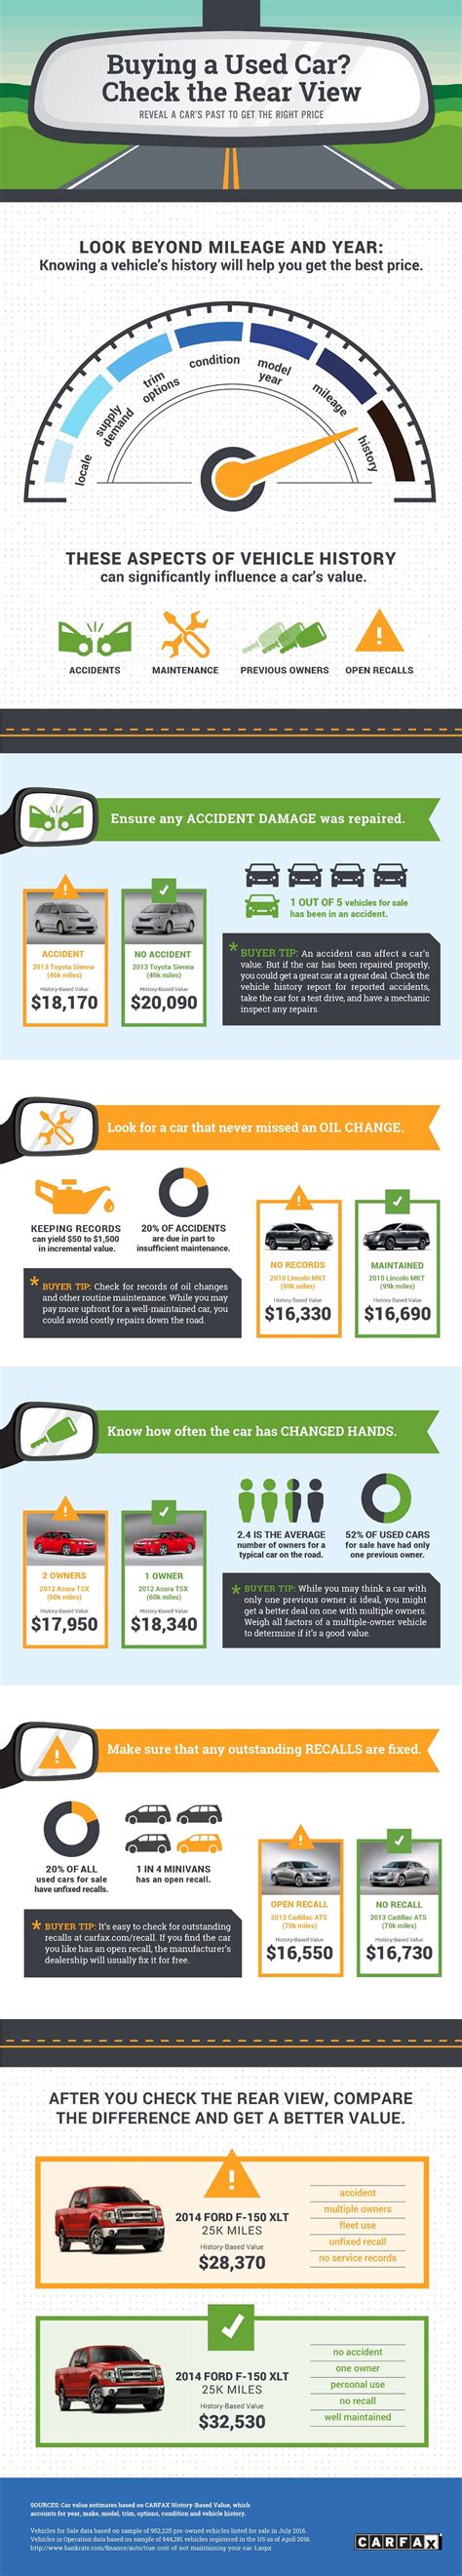 Buying Used Cars - Precautionary Guide - Infographic | Car buying, Car buying tips, Car buying guide